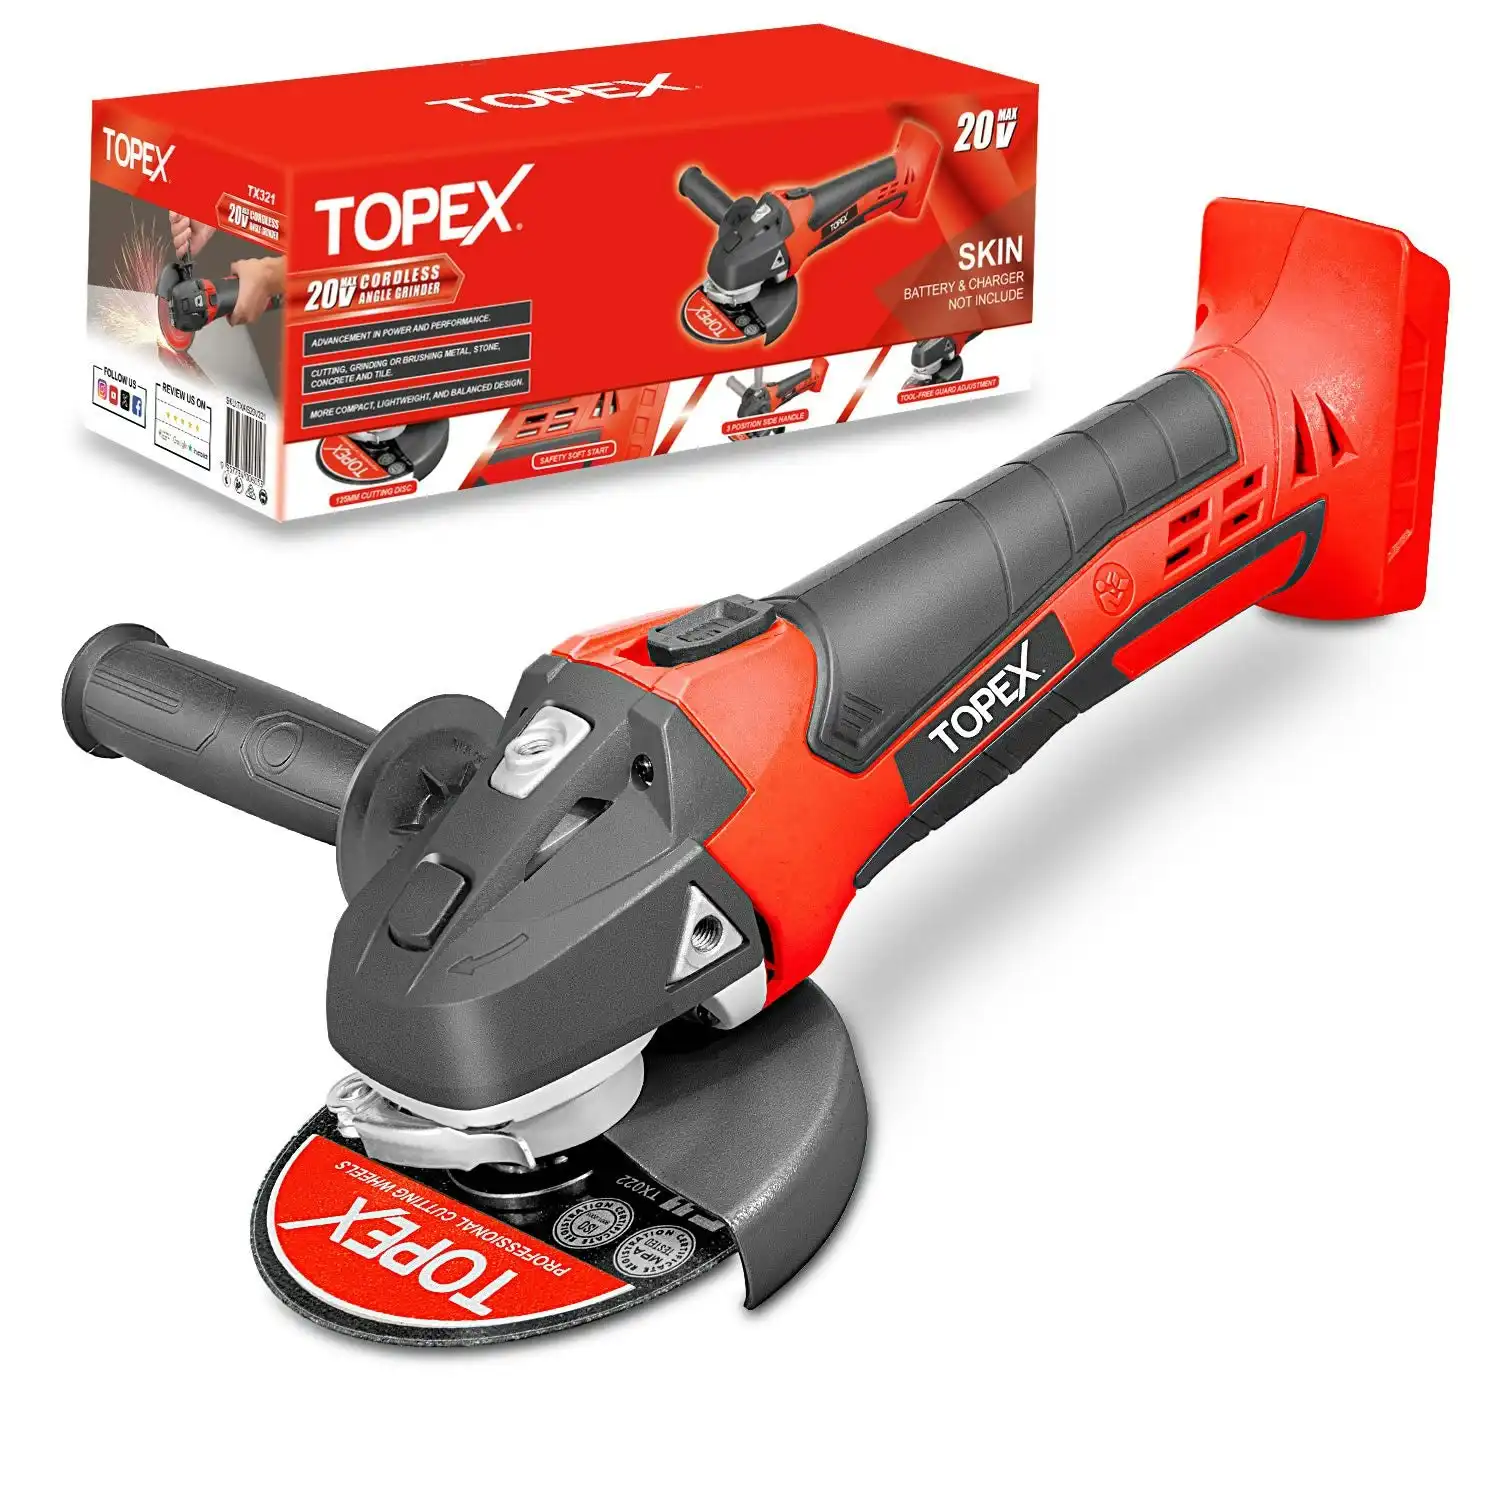 Topex 20V Cordless Angle Grinder 125mm Li-ion Grinding Cutting Power Tool Skin Only